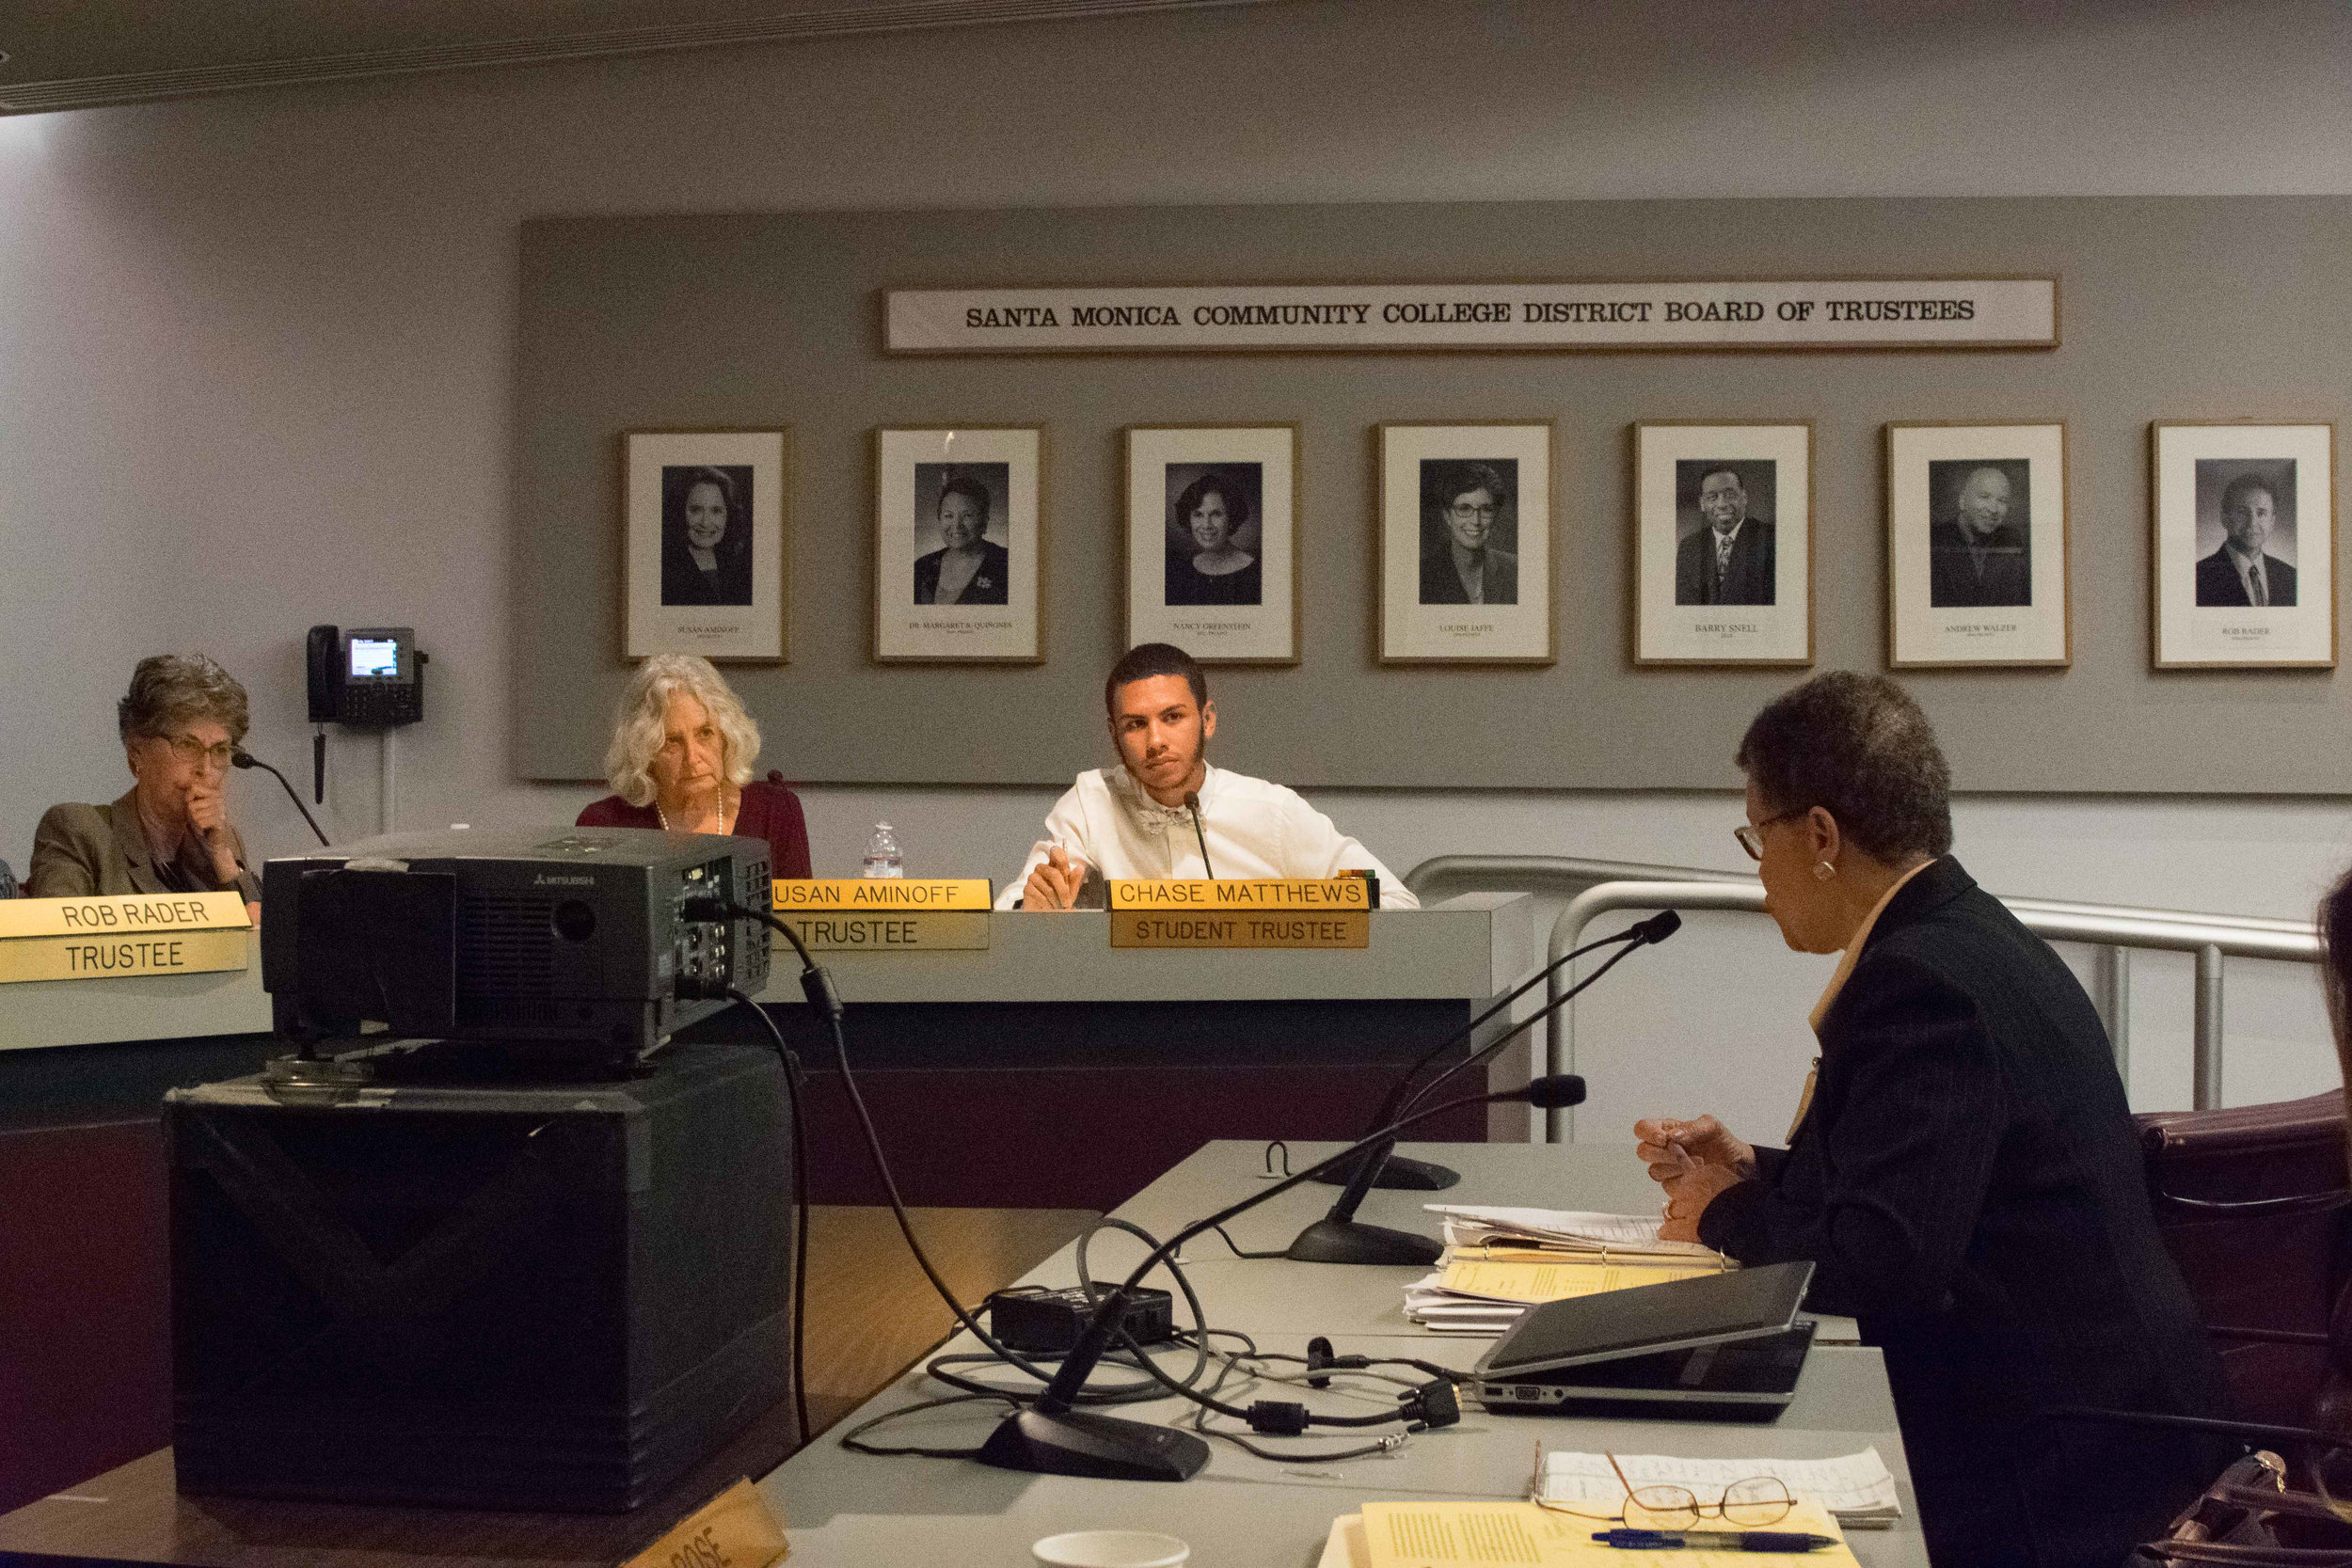  On October 3rd, Student Trustee Chase Matthews (center) discusses with the Vice President of Human Resources, Marcia Wade (right) on raising the minimum wage for student workers at Santa Monica College to be the same as the city of Santa Monica, Cal